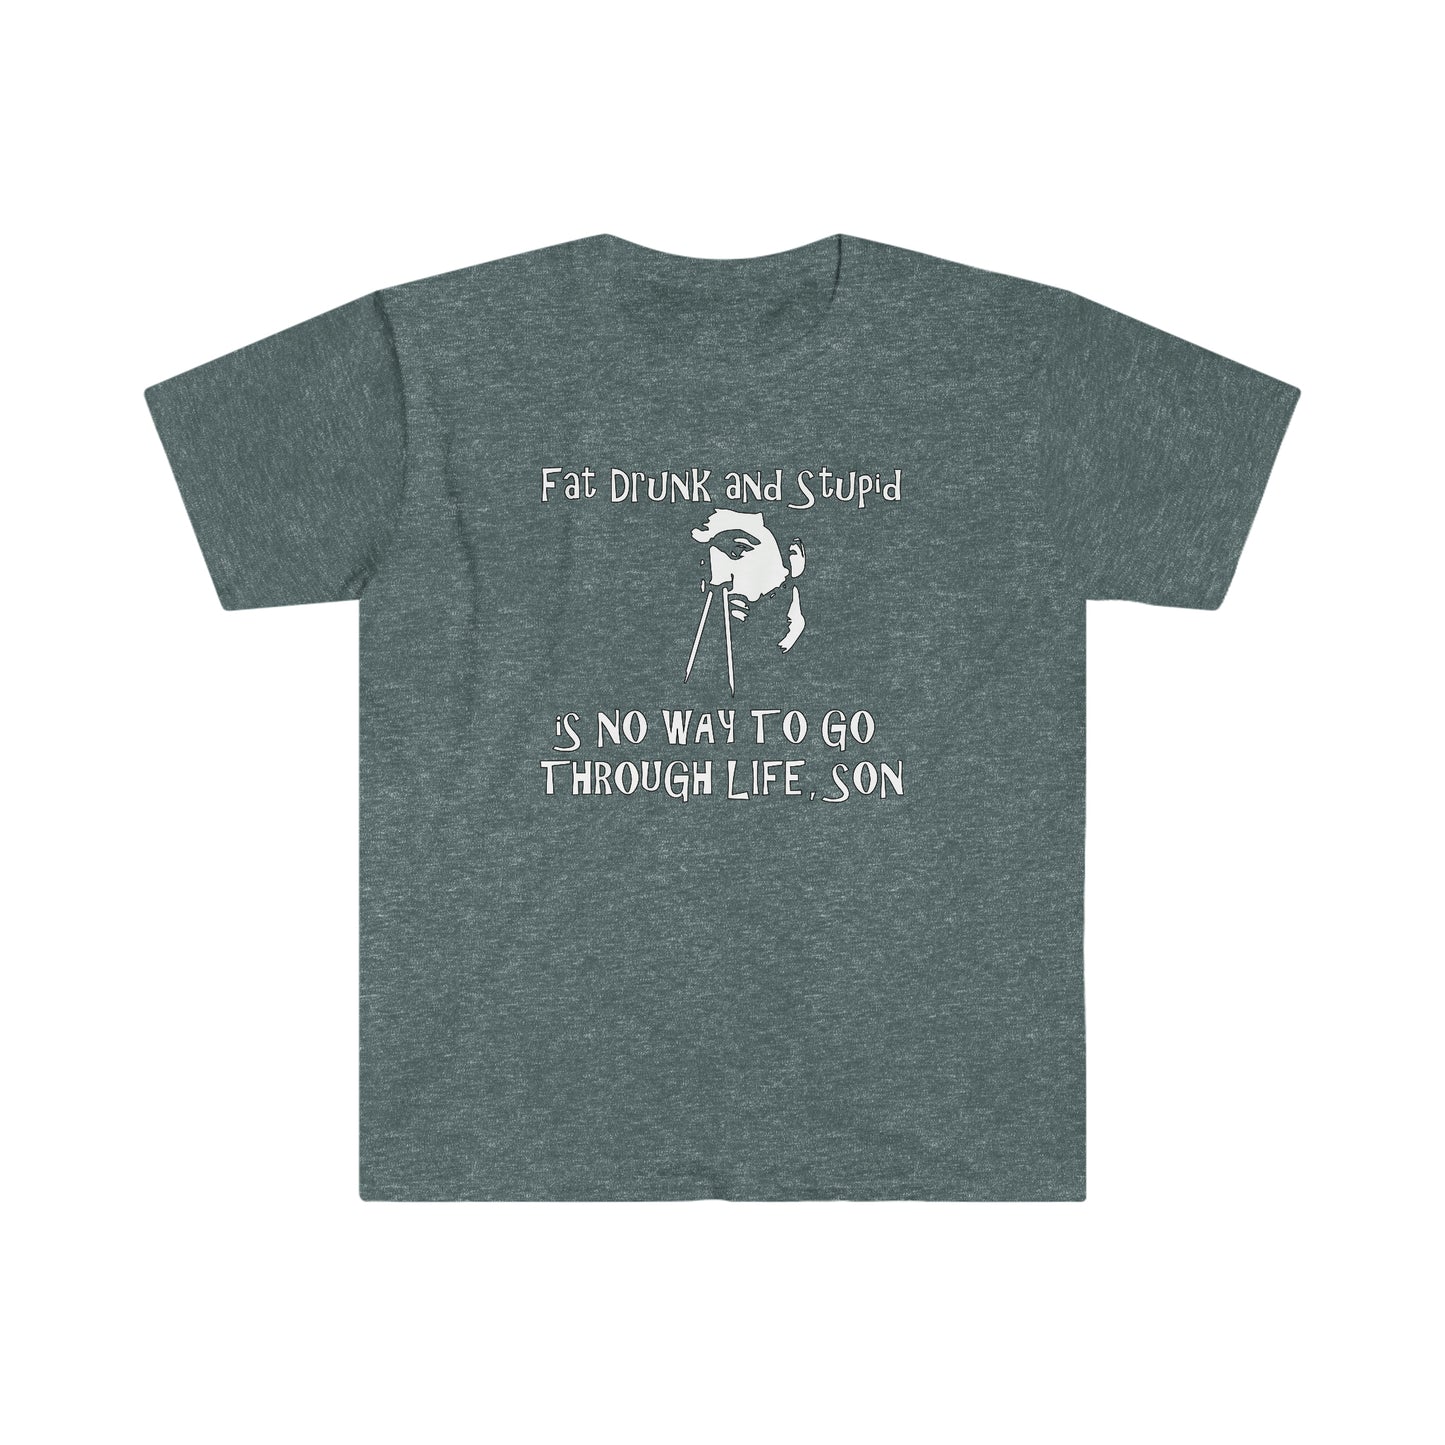 Animal House "Fat Drunk and Stupid" Softstyle T-Shirt